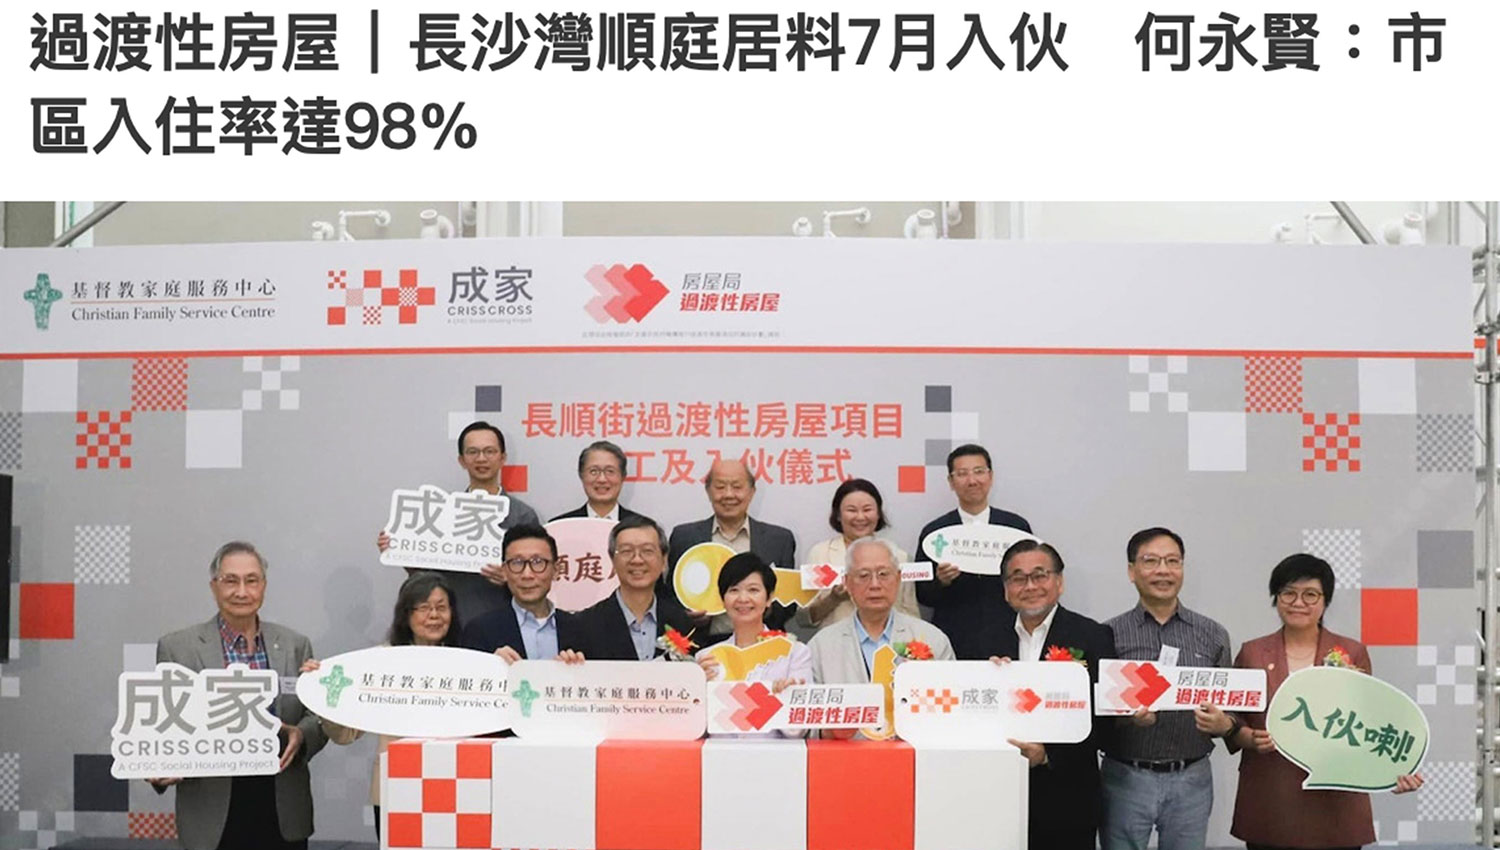 Cover Image - HK01 - Transitional Housing | Shun Tin Kyu in Cheung Sha Wan is expected to be ready for move-in in July. Paul Ho Wing-huen: Urban occupancy rate reaches 98%.